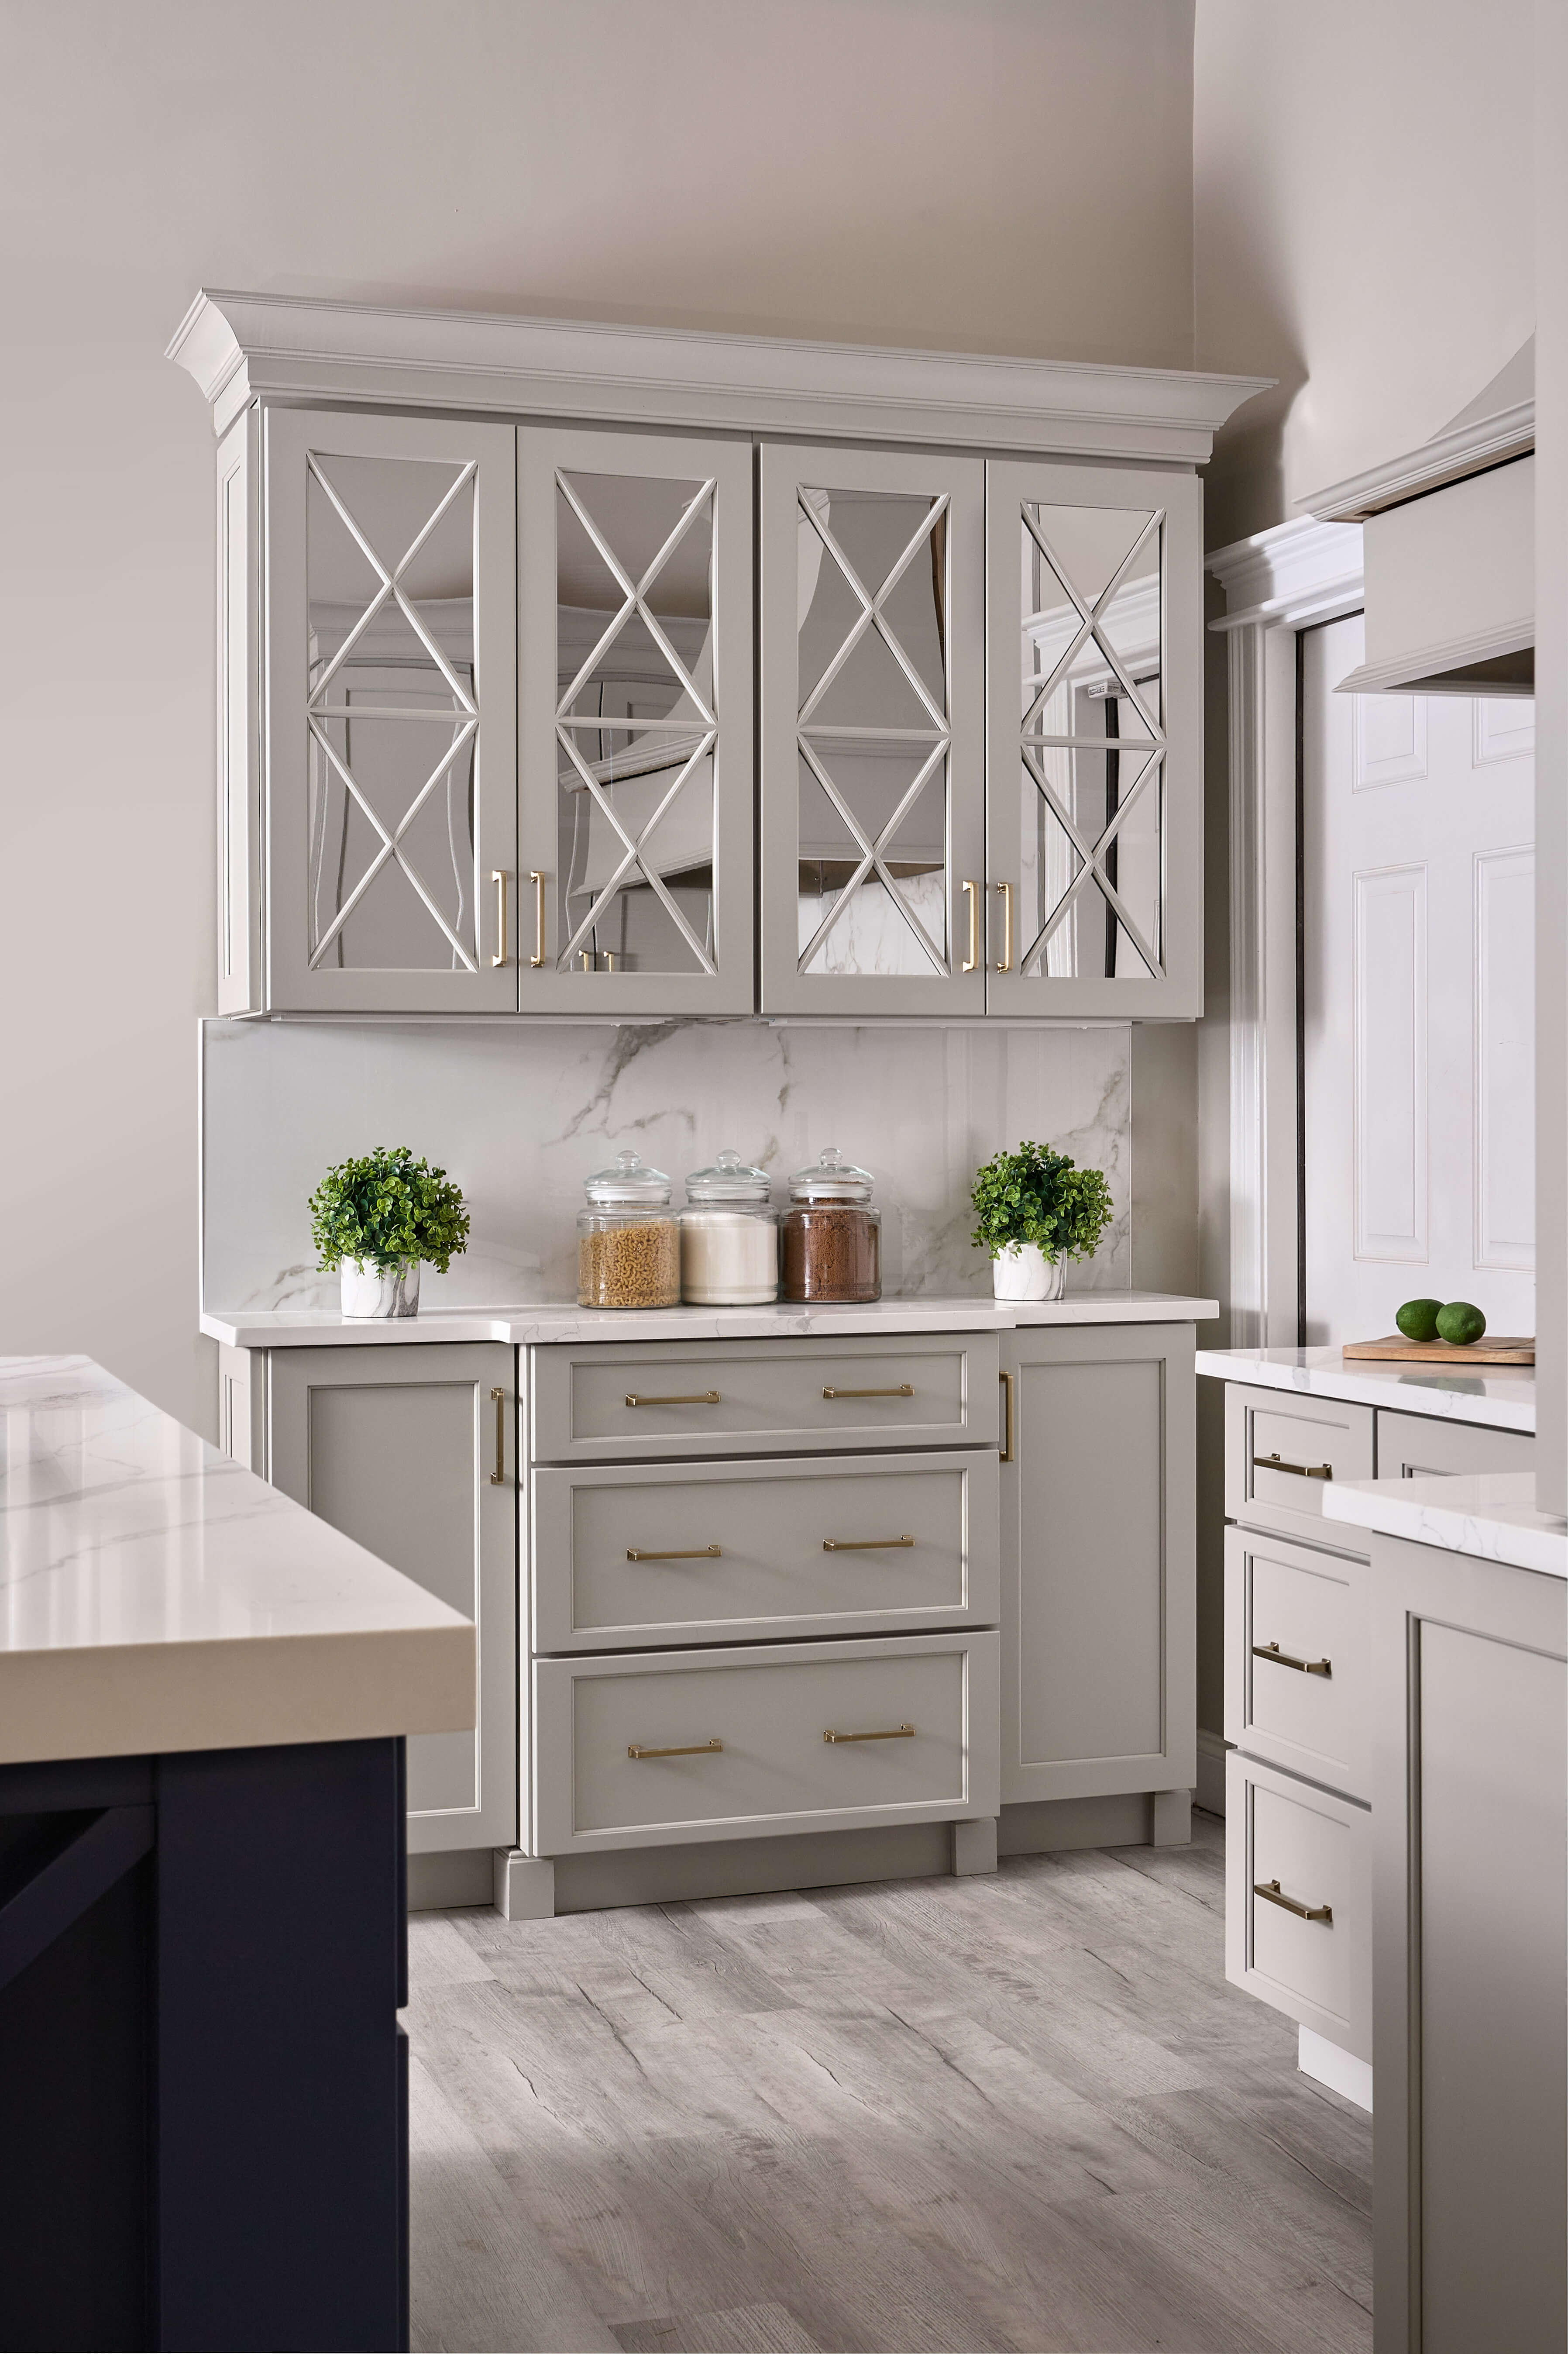 The mullion cabinet doors in this beautiful kitchen use mirror inserts to add drama, and beauty to the space.